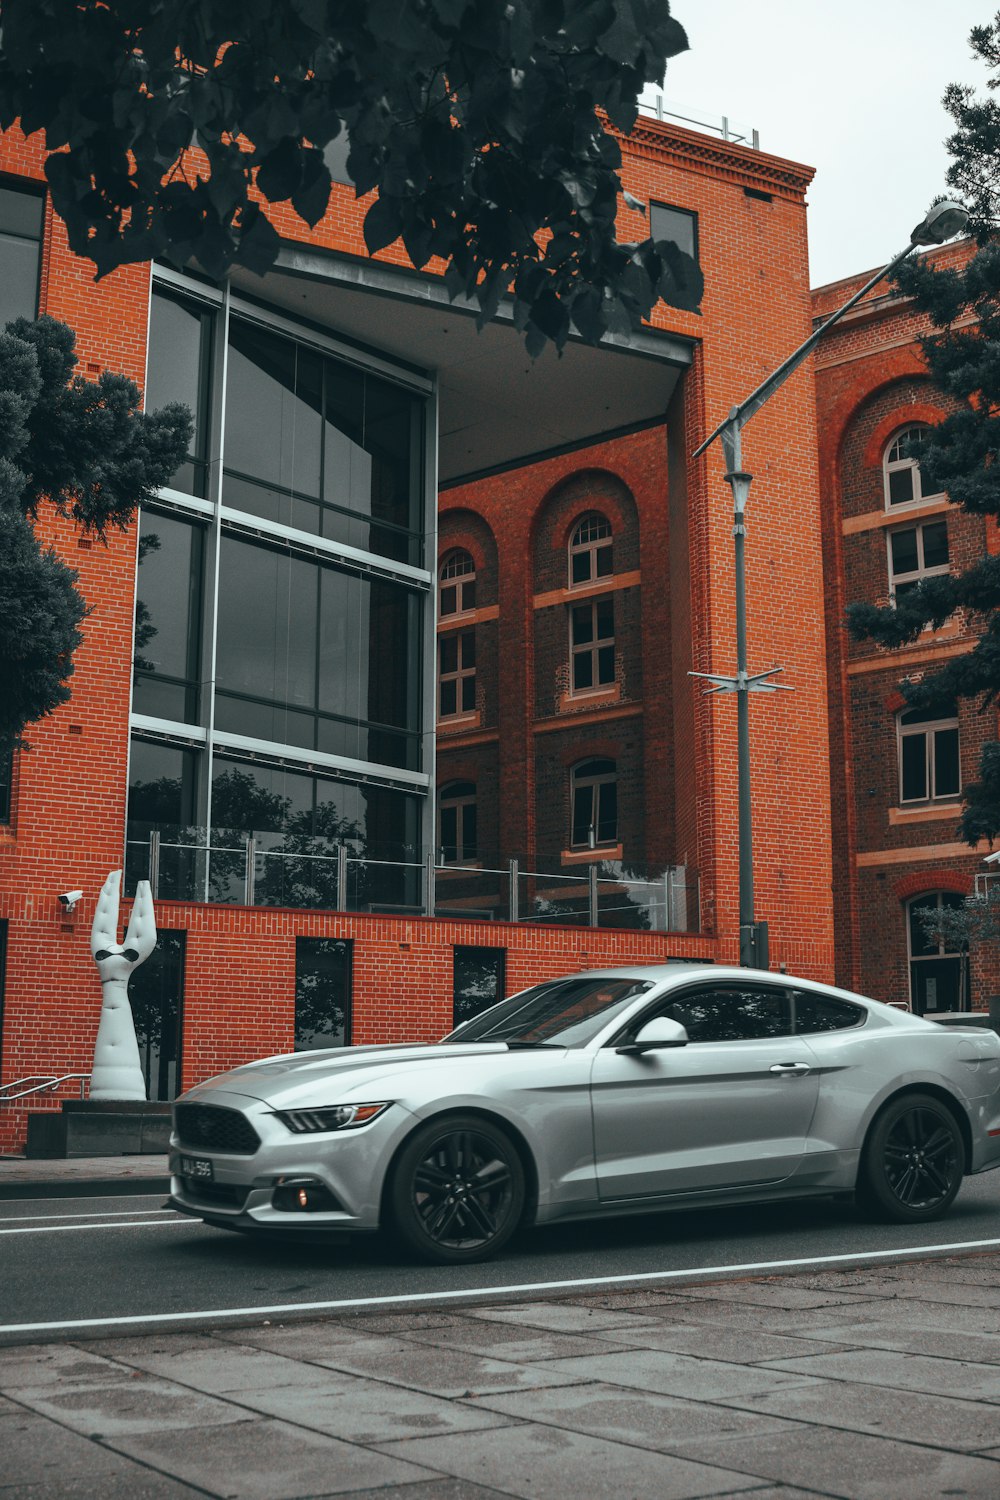 a silver car parked in front of a red brick building